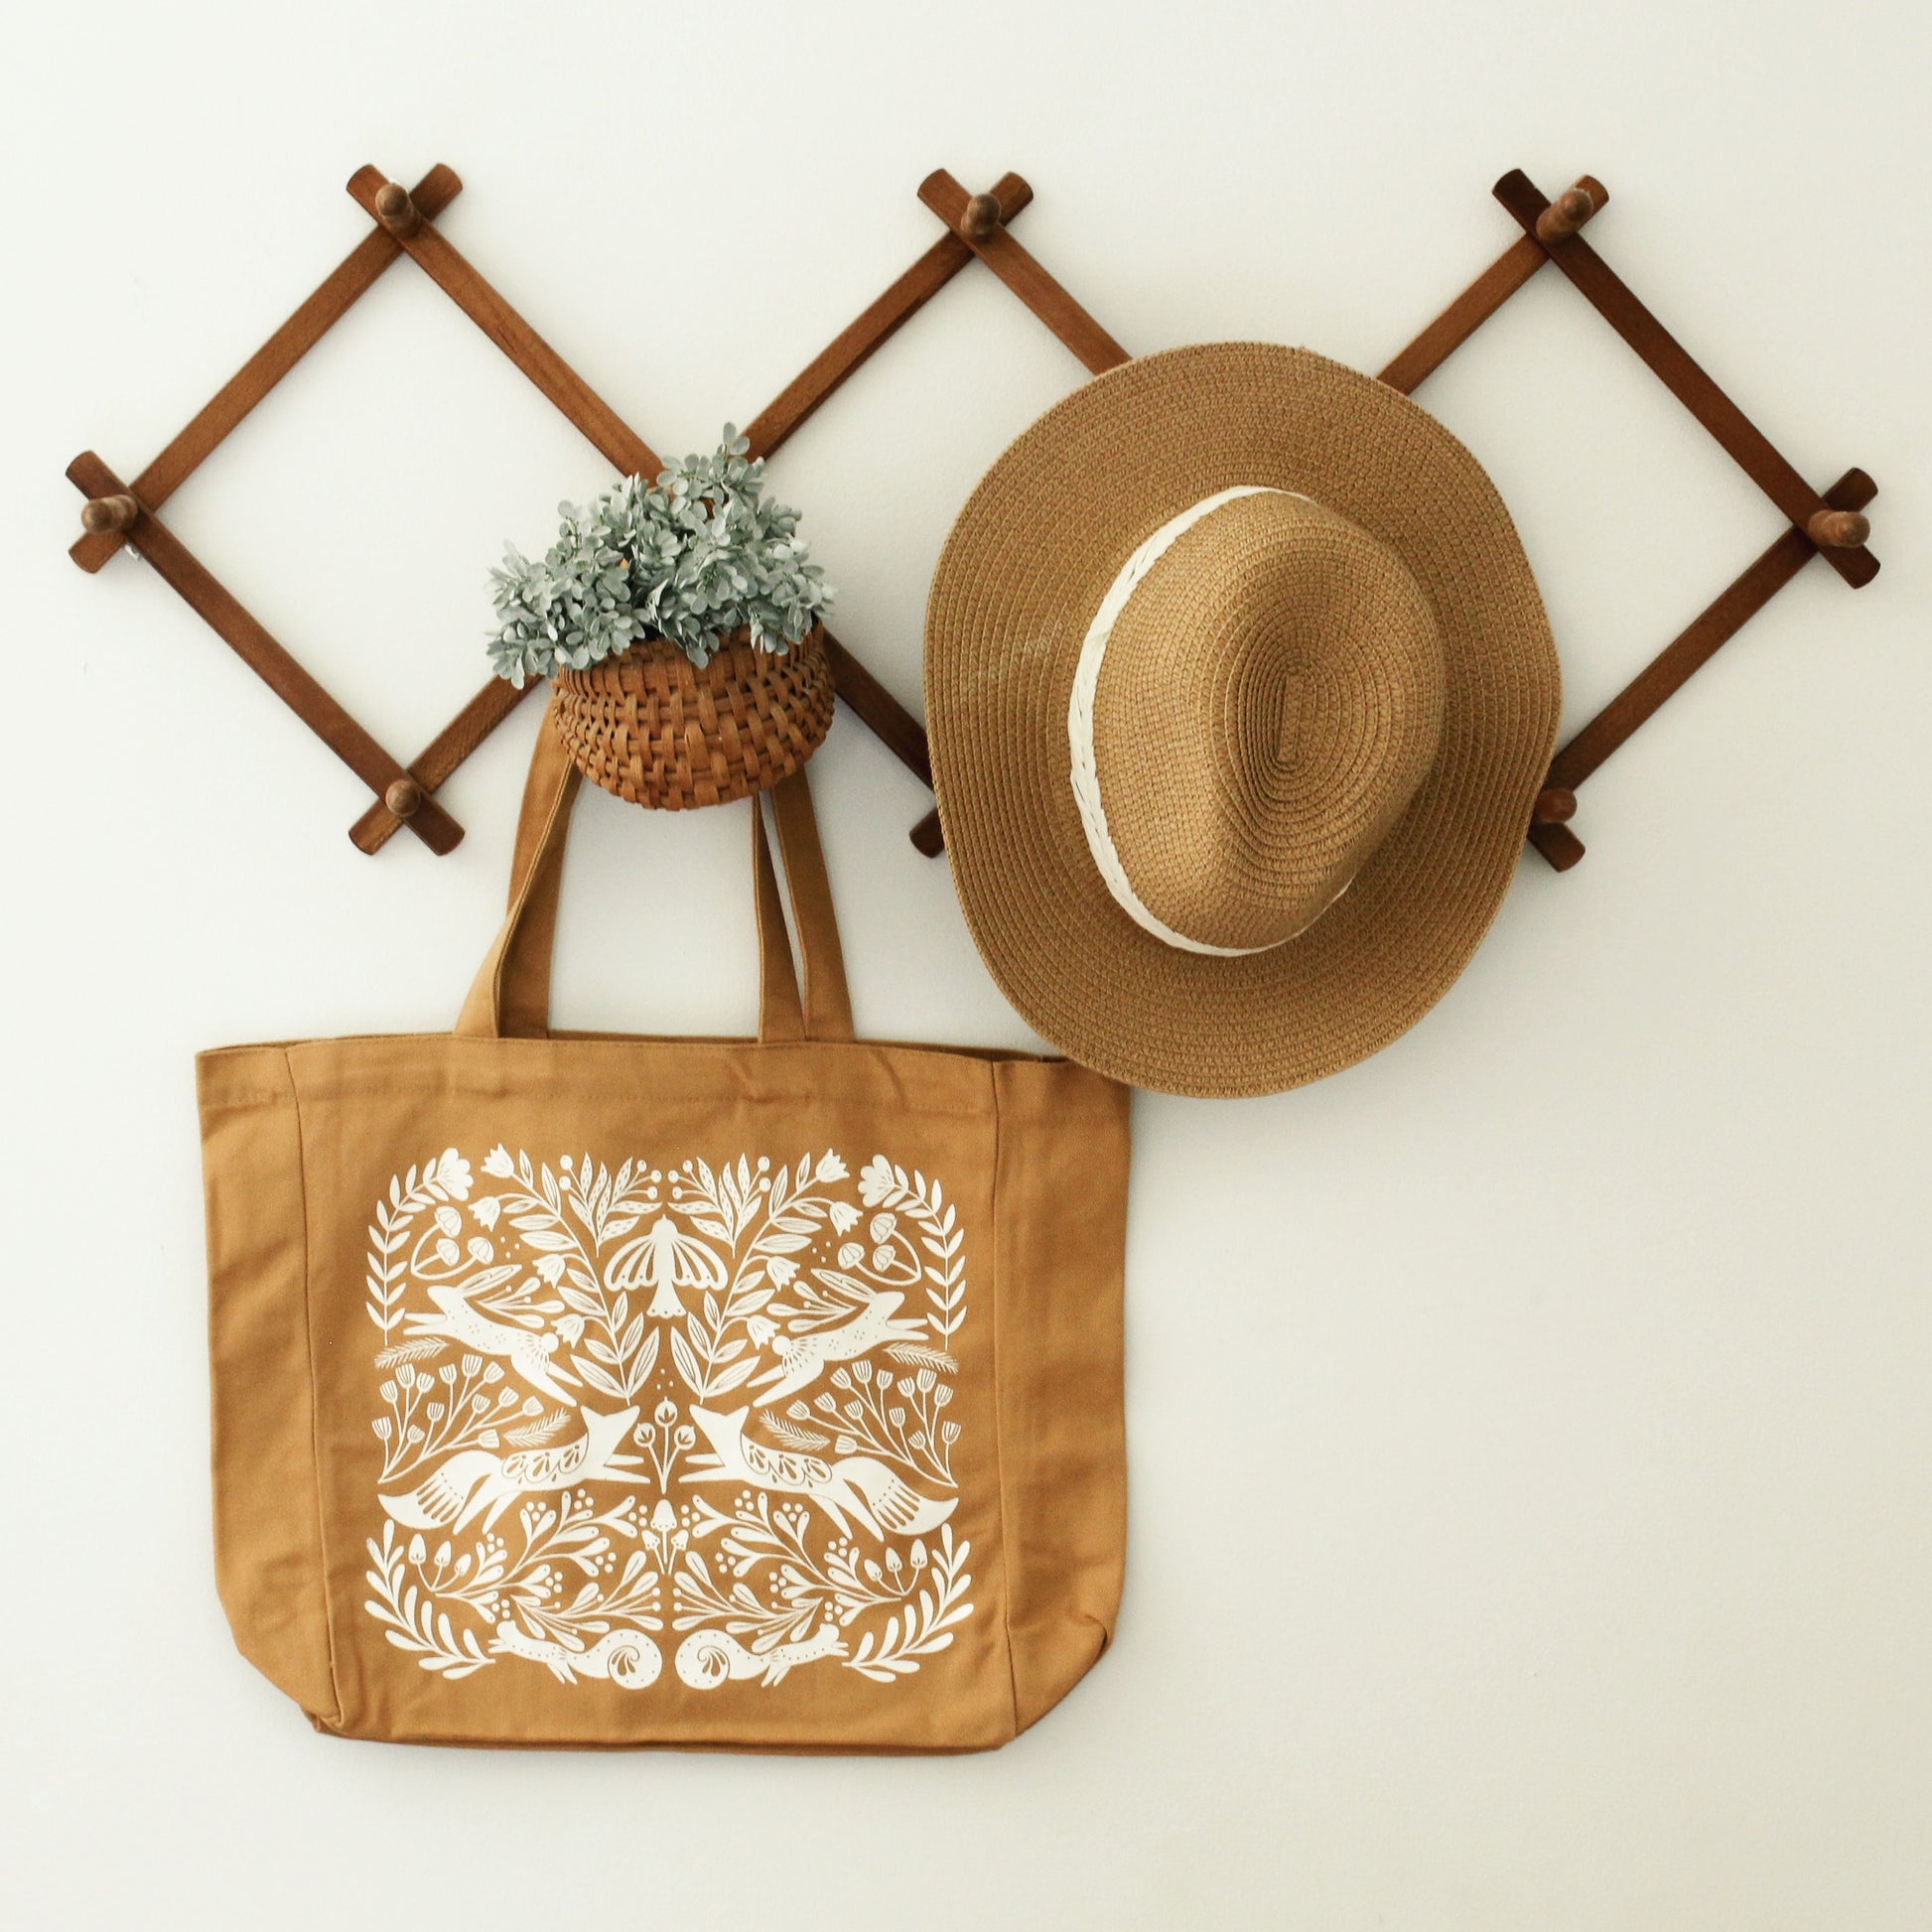 gusseted tote bag in burnt orange with a detailed silk screen design in warm white with florals, mushrooms, foxes, squirrels, rabbits and a bird. shown staged hanging on a wood accordion rack with a straw hat and greenery.